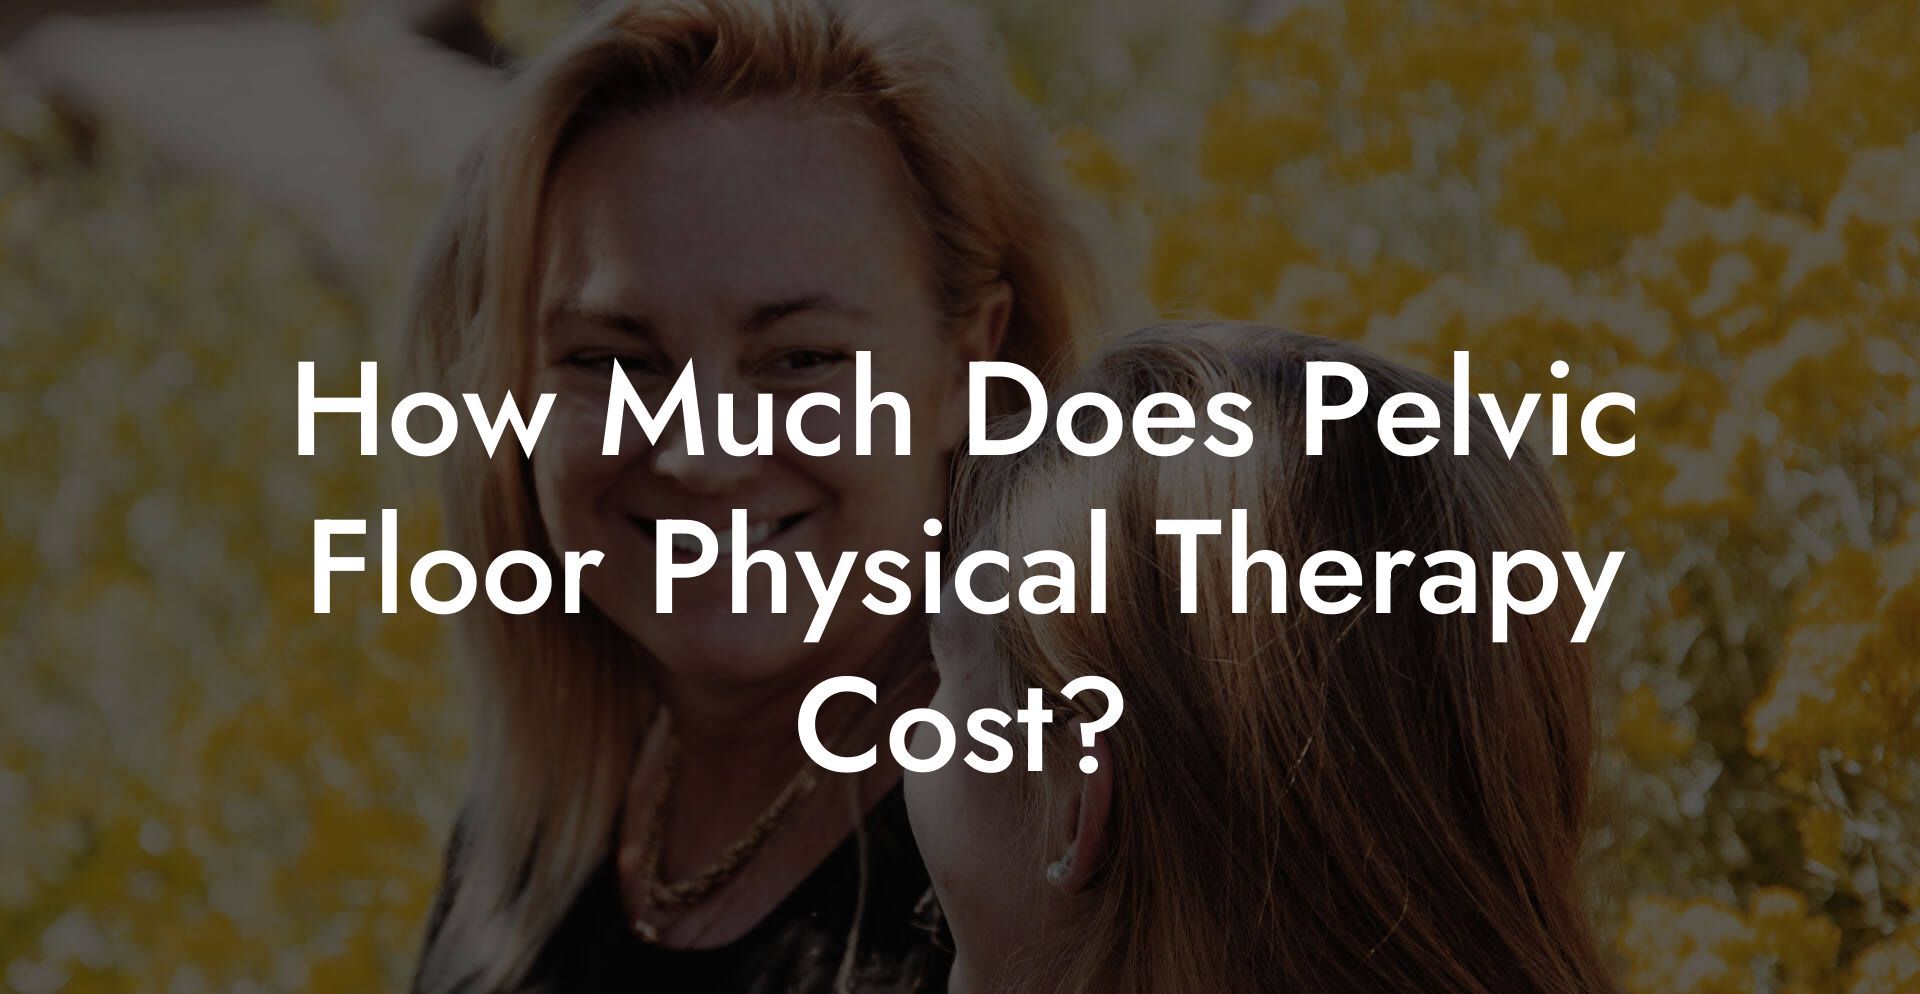 How Much Does Pelvic Floor Physical Therapy Cost?